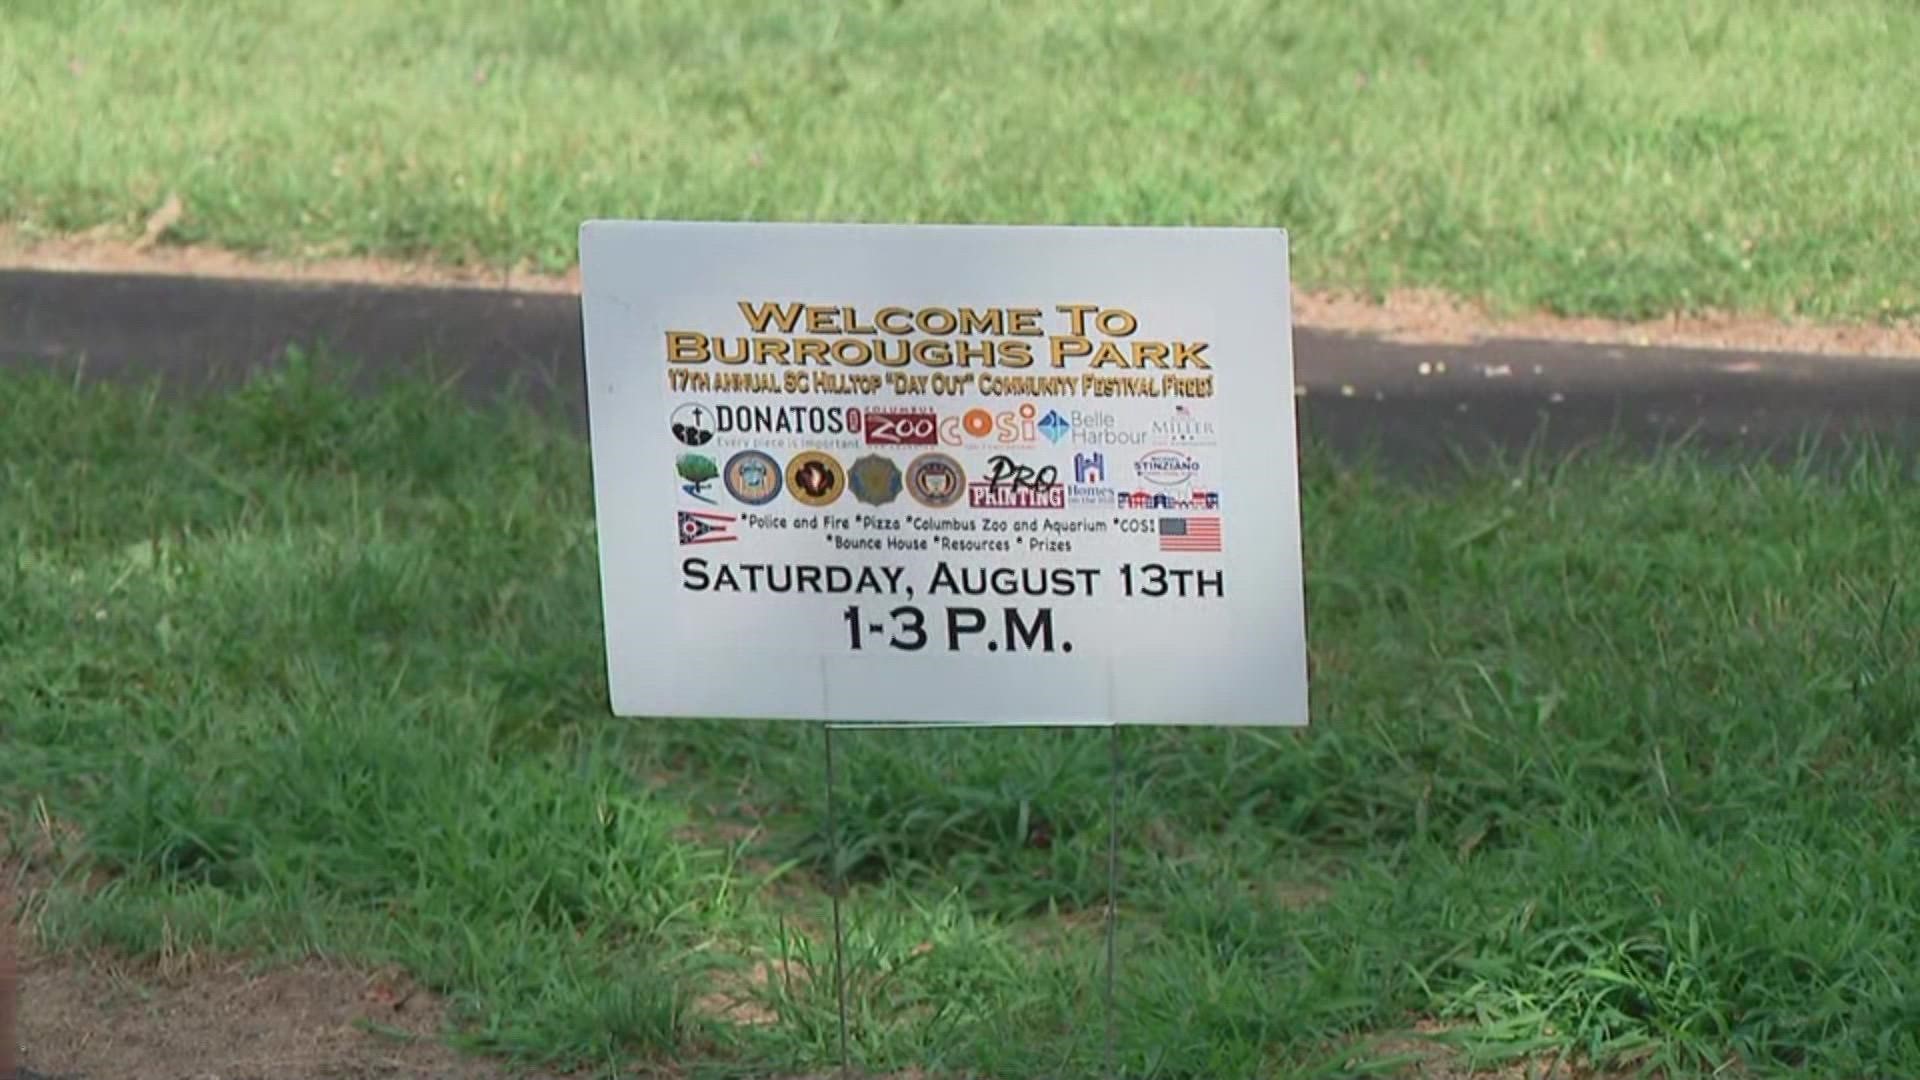 The event was delayed while the new park at John Burroughs Elementary School was being finished.